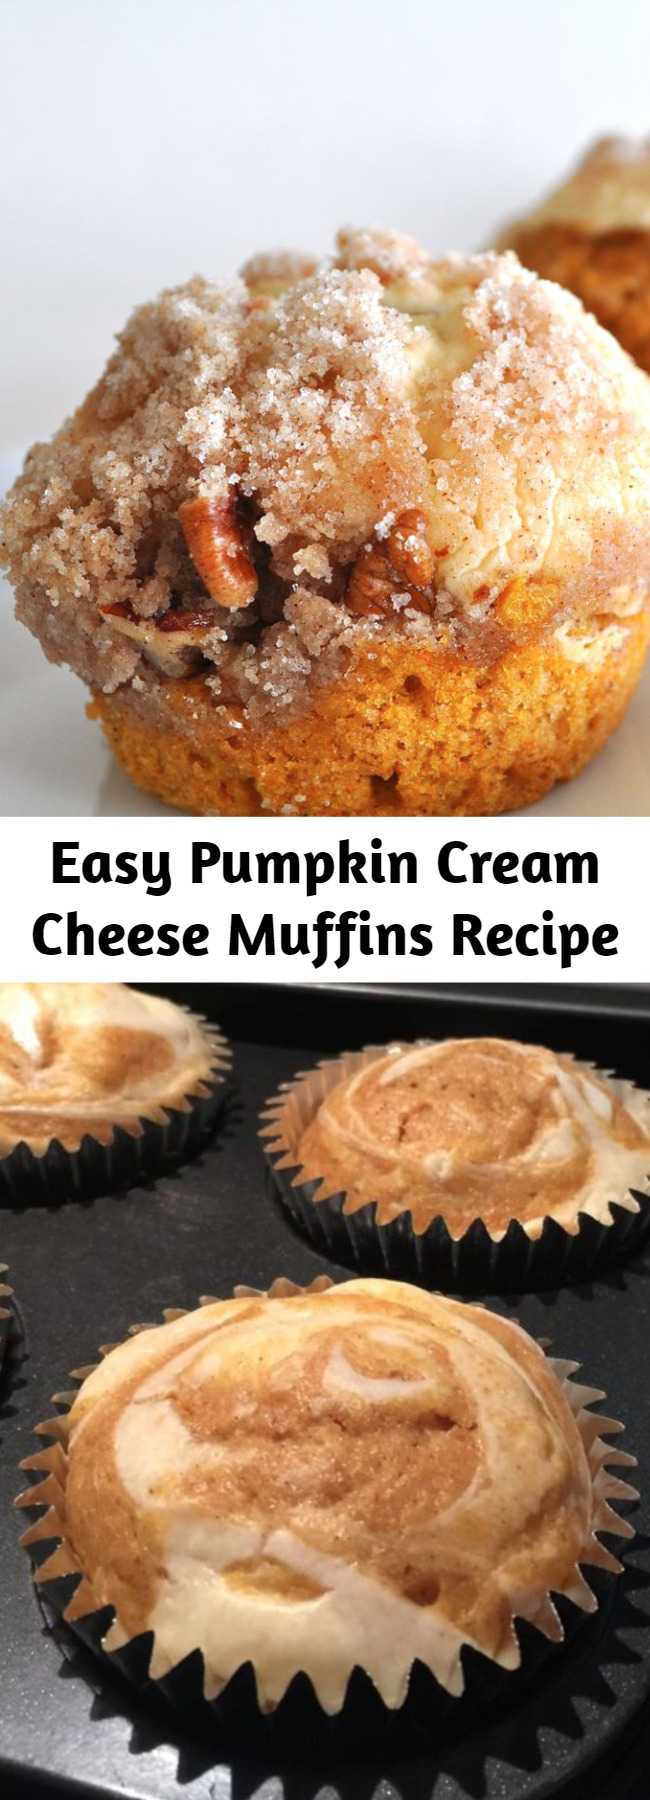 Easy Pumpkin Cream Cheese Muffins Recipe - These muffins are the best! They are moist and very delicious. Not only taste great but looking so good as well! You'll be glad you made this recipe for pumpkin muffins with a cream cheese filling and a streusel topping. #breakfastrecipes #brunchrecipes #breakfastideas #brunchideas #muffins #muffinrecipes #baking #bakingrecipes